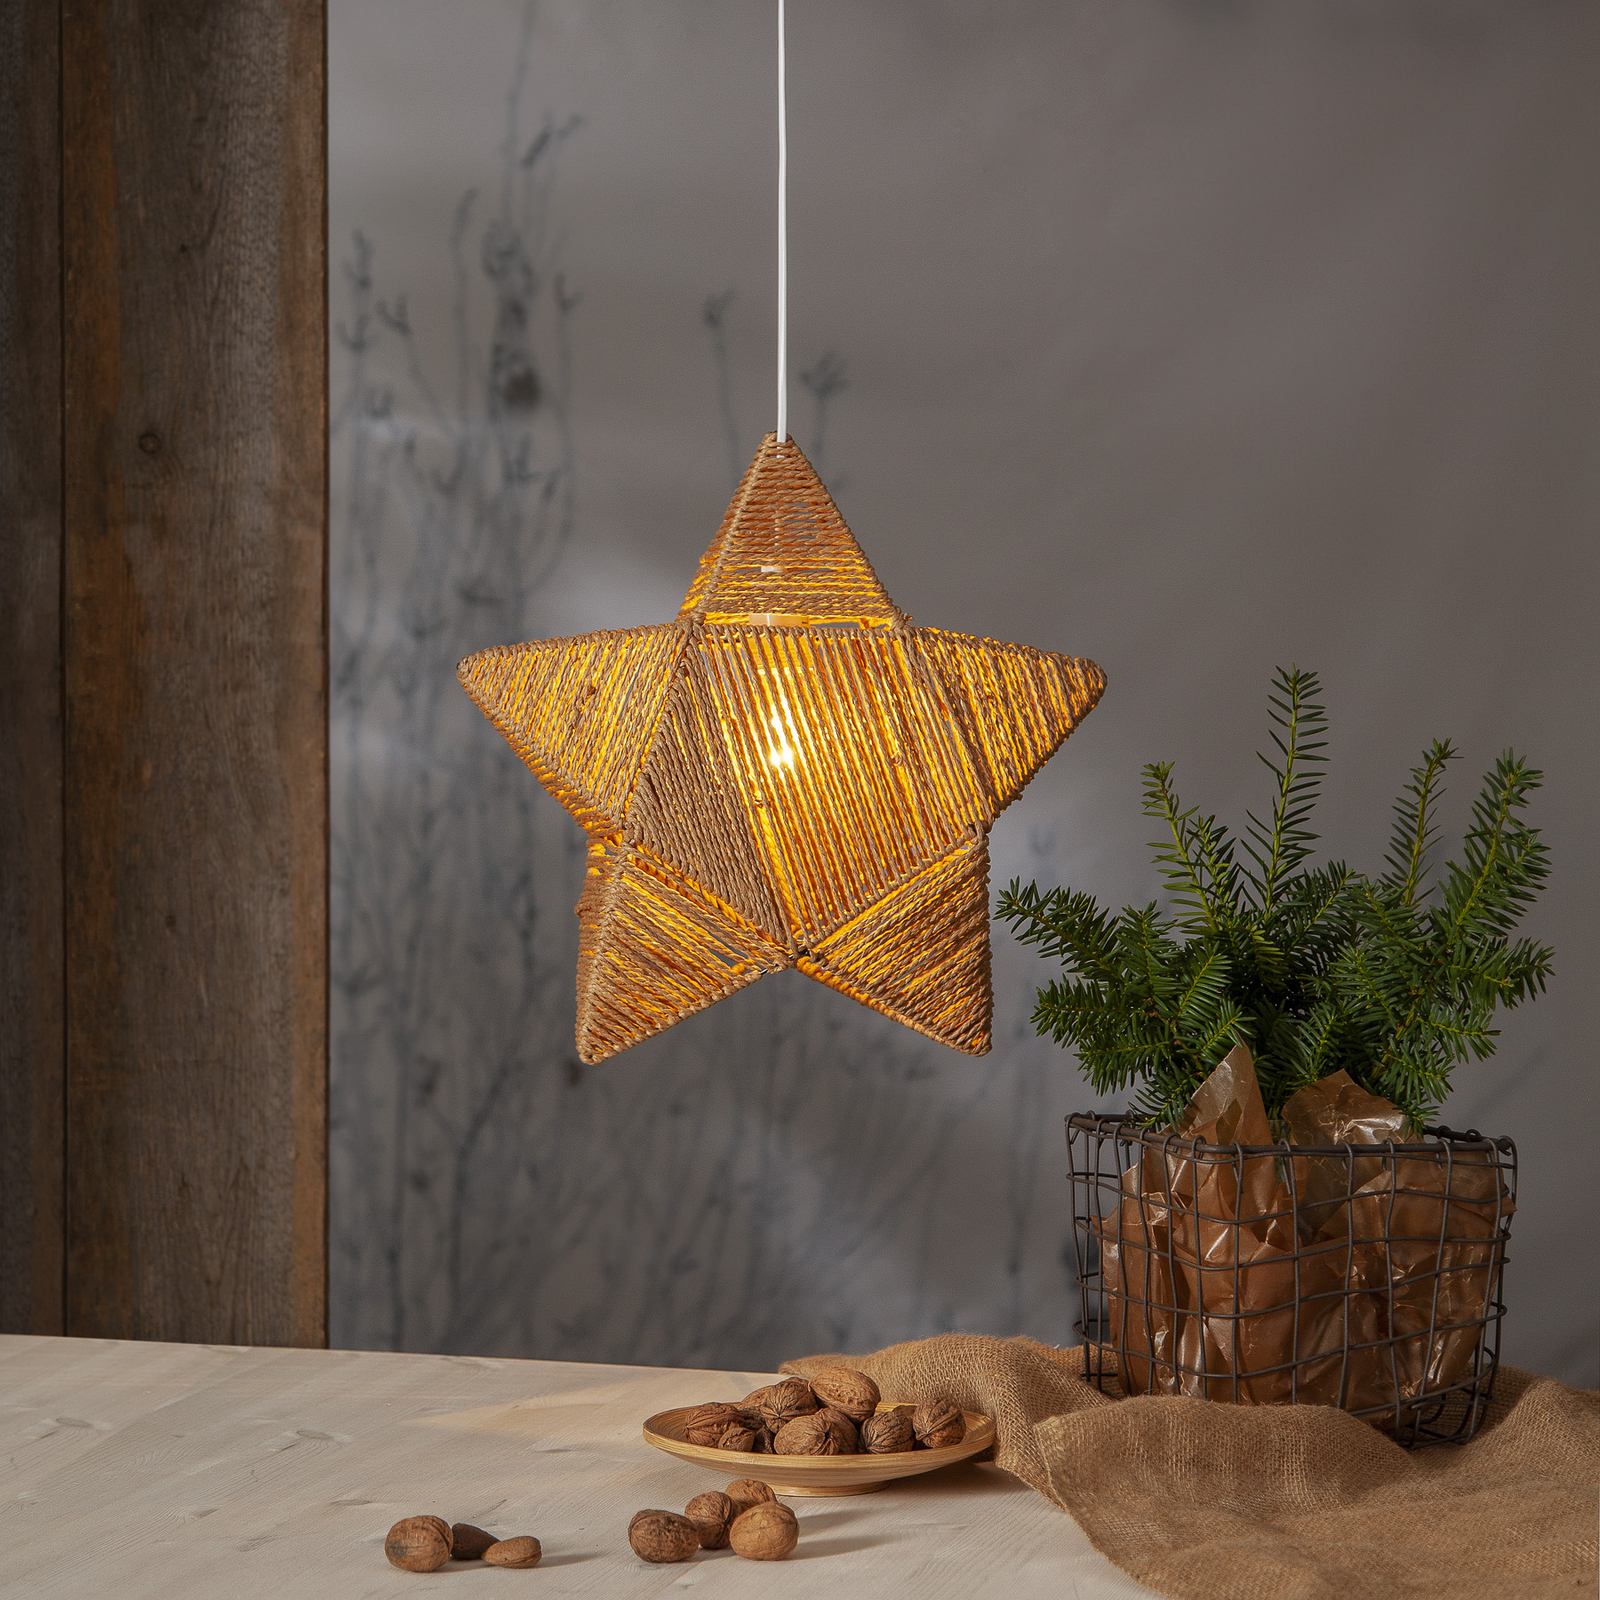 Rappe decorative star, paper strings, hanging